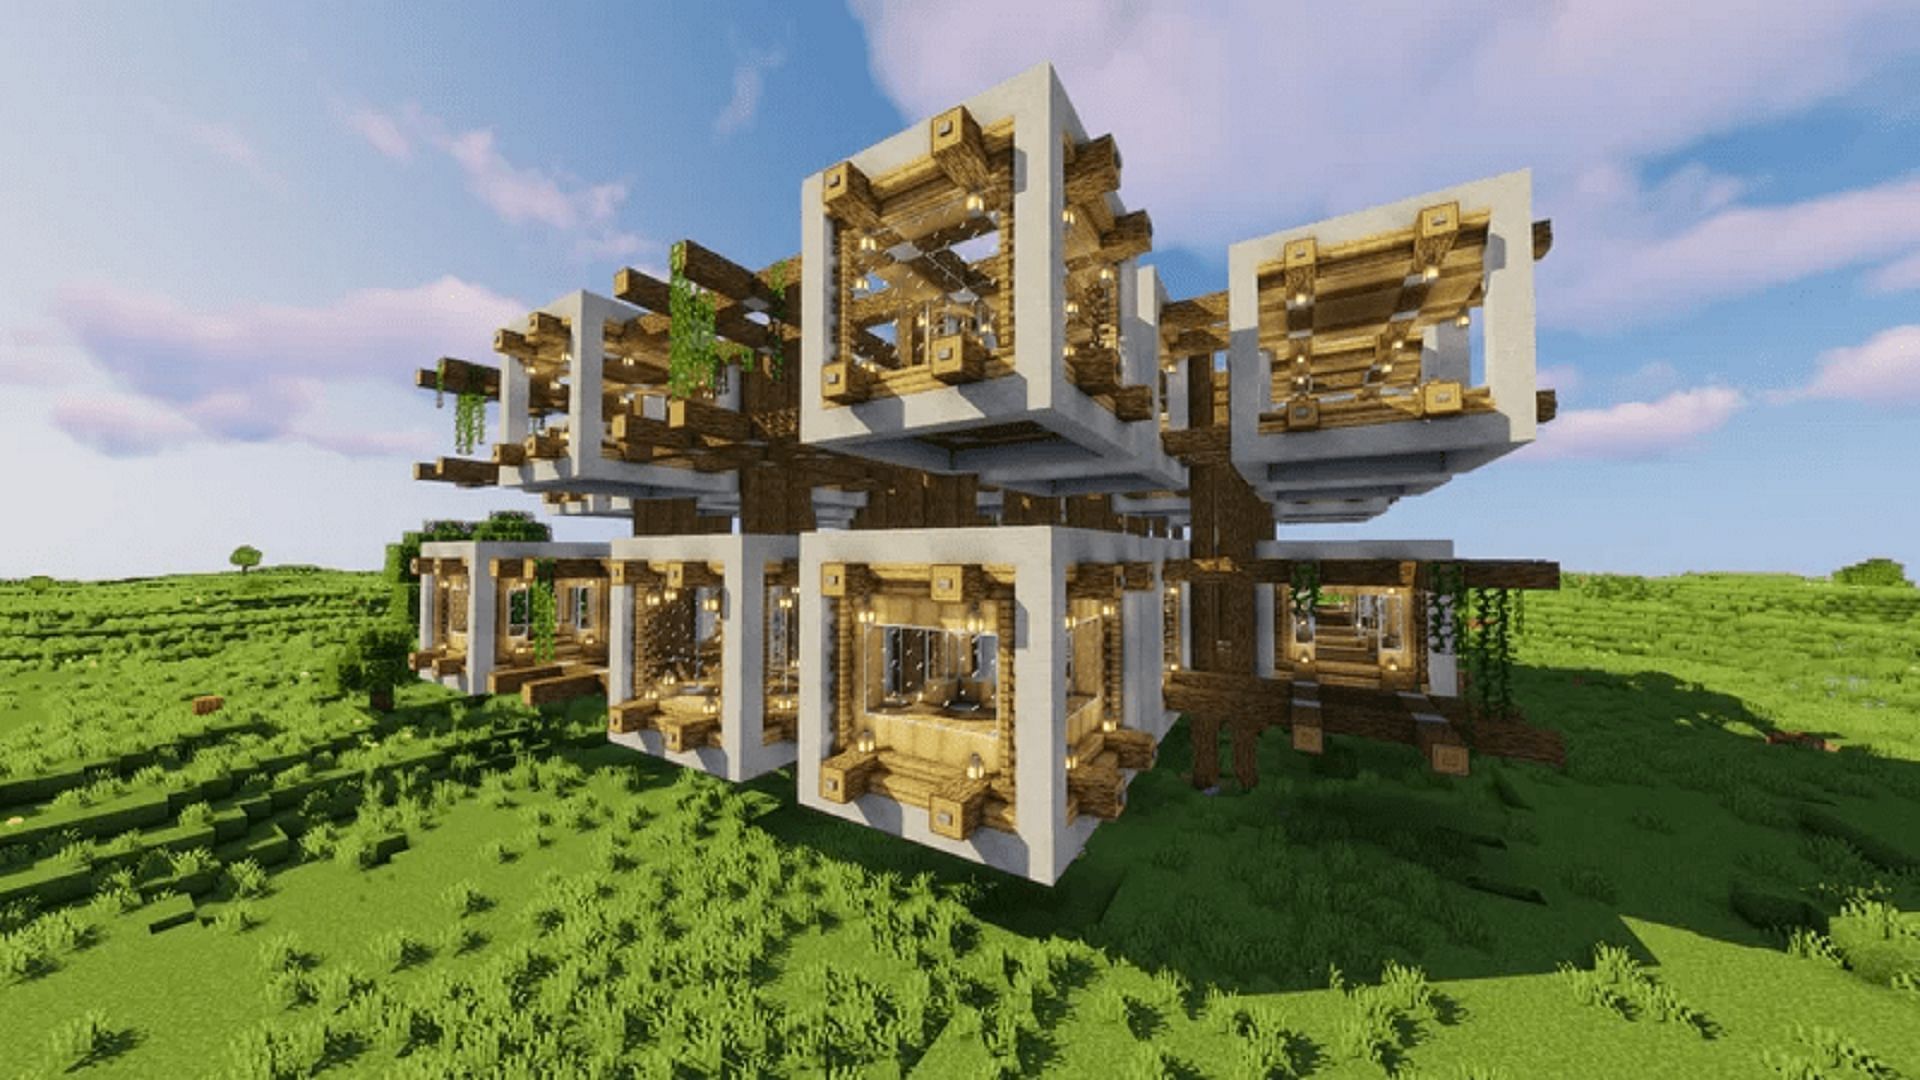 This mega base design incorporates several small modules that make up the whole (Image via MarchiWORX/Planet Minecraft)